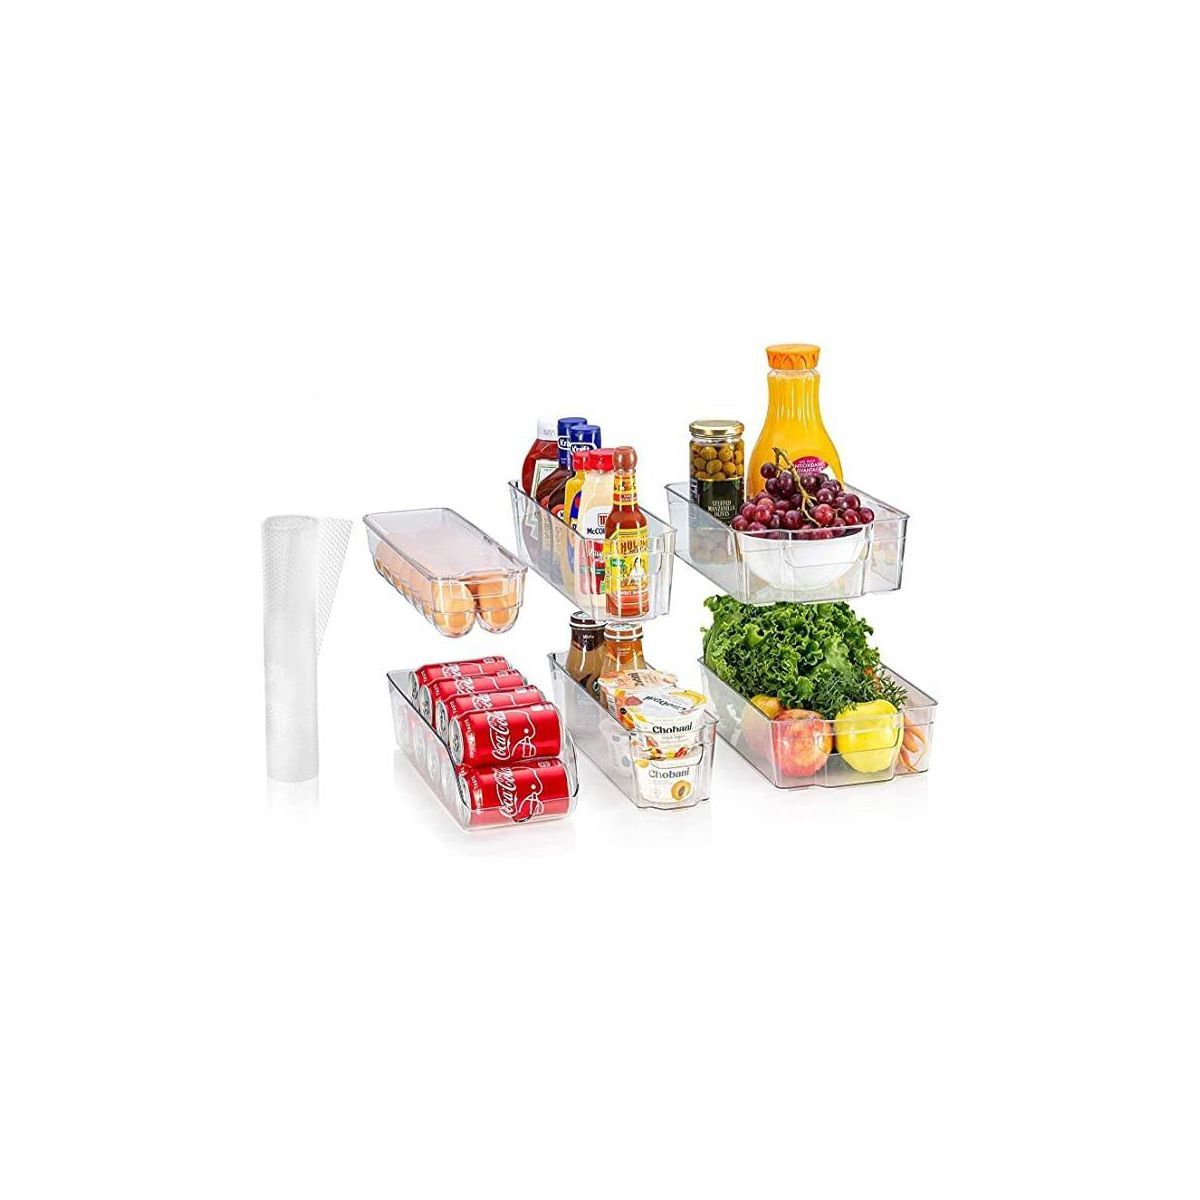 Refrigerator Bins for Food Storage - Multipurpose Stackable Clear Plastic Fridge Organizers with ... | Target